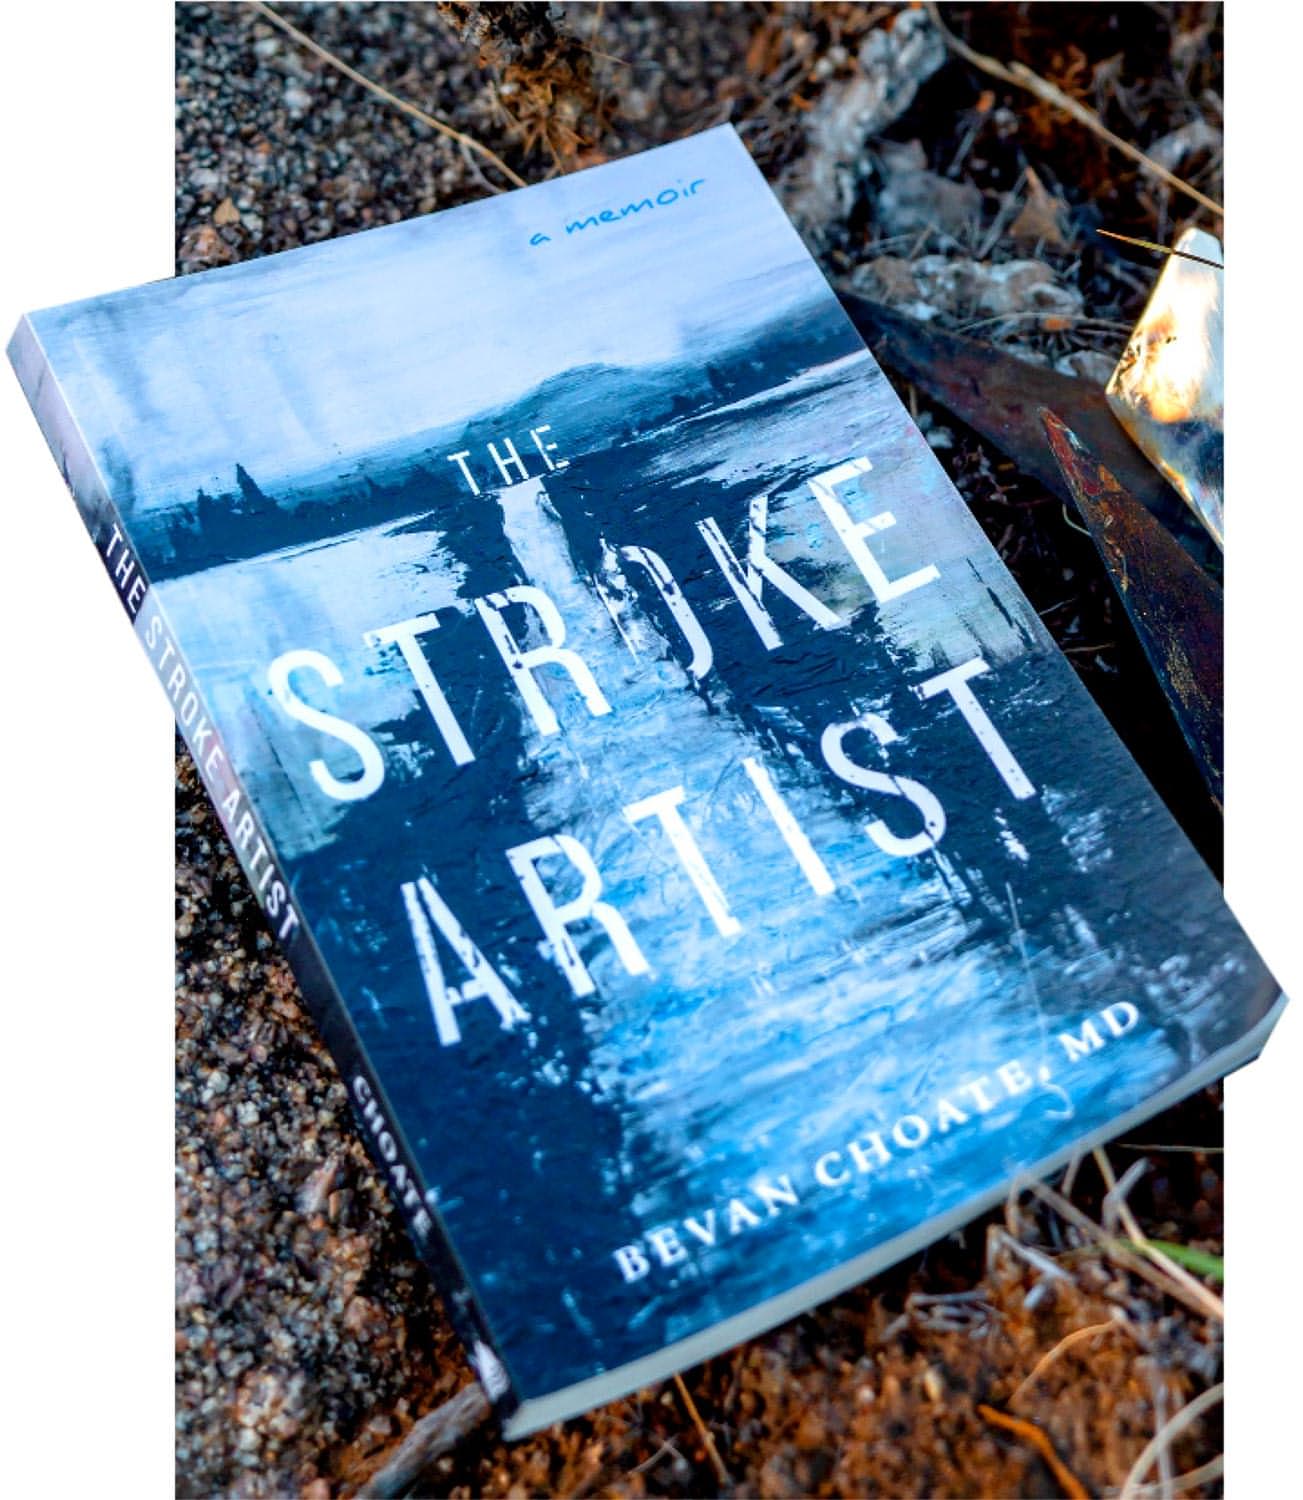 a copy of The Stroke Artist sits on the ground